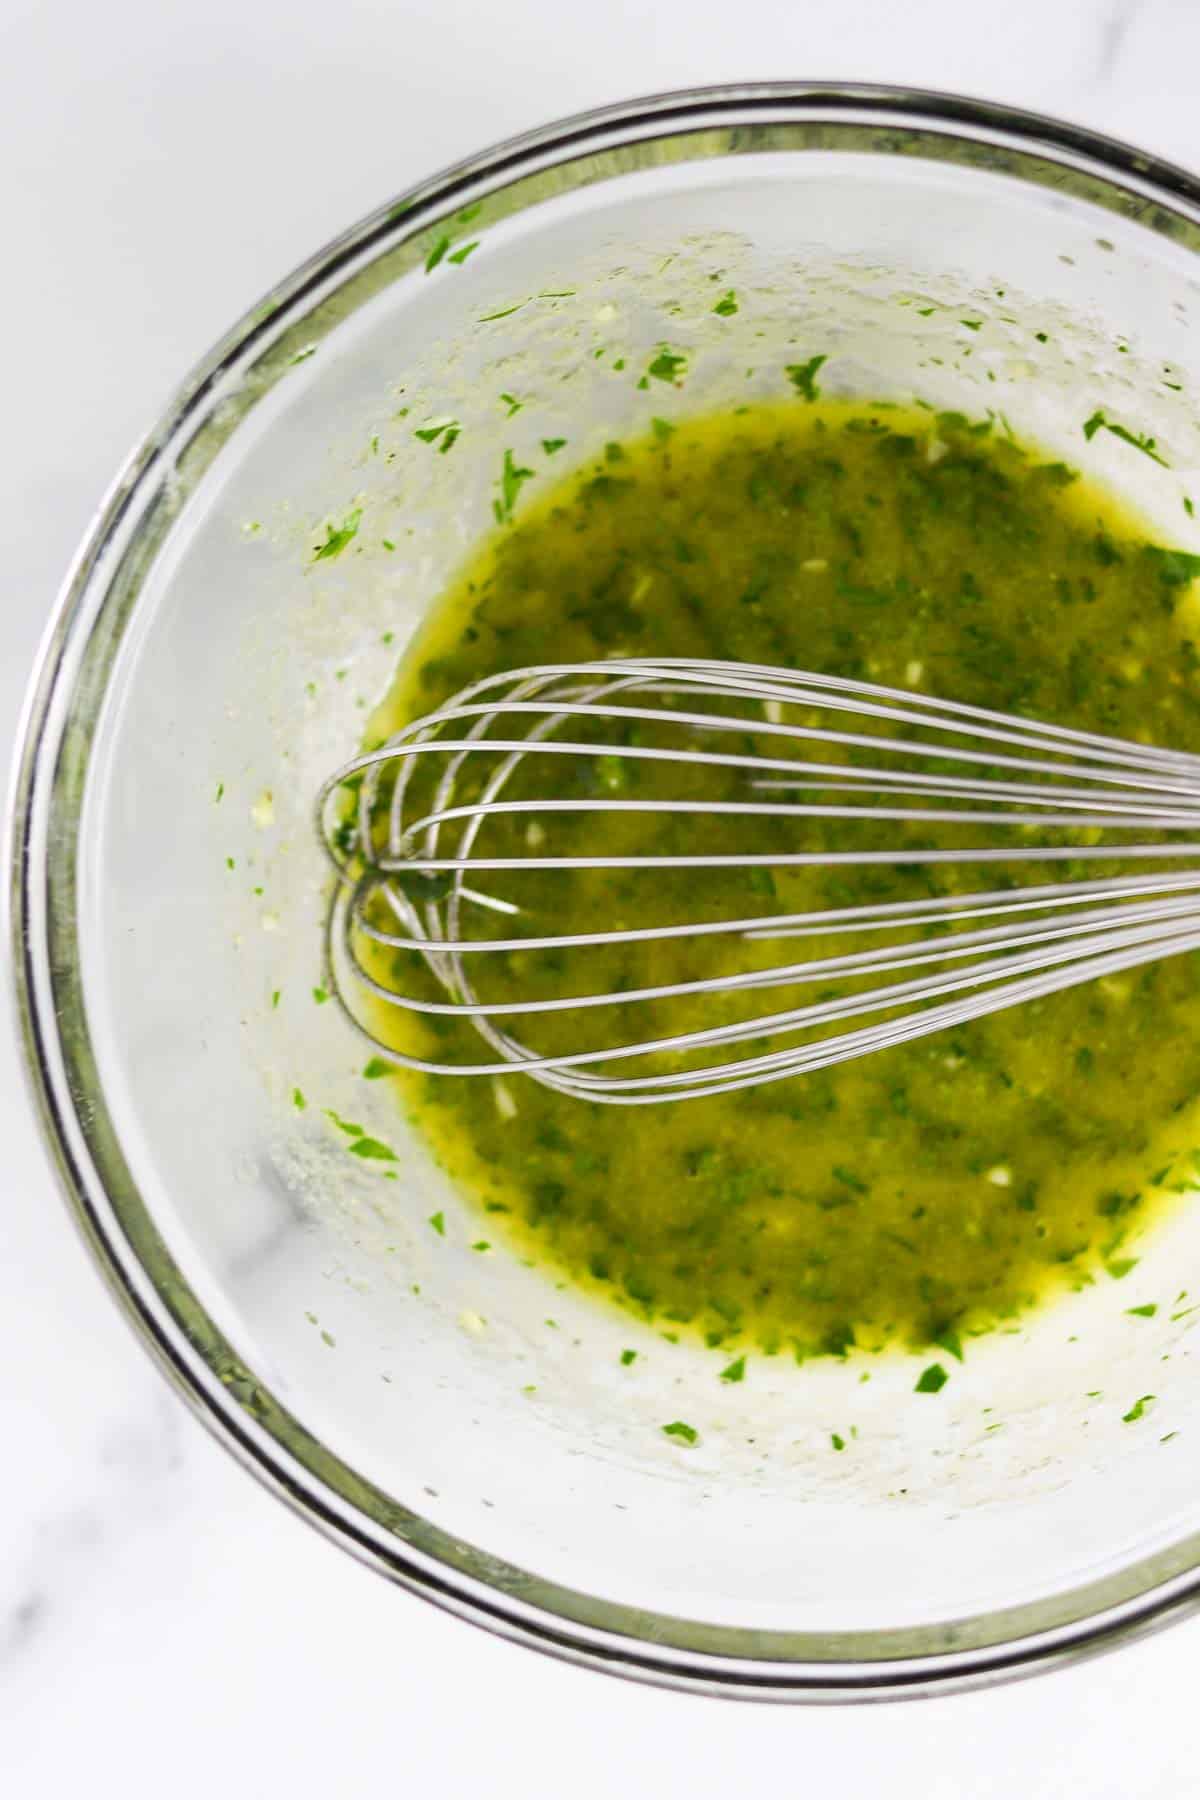 Herbed vinaigrette in a glass bowl with a whisk.